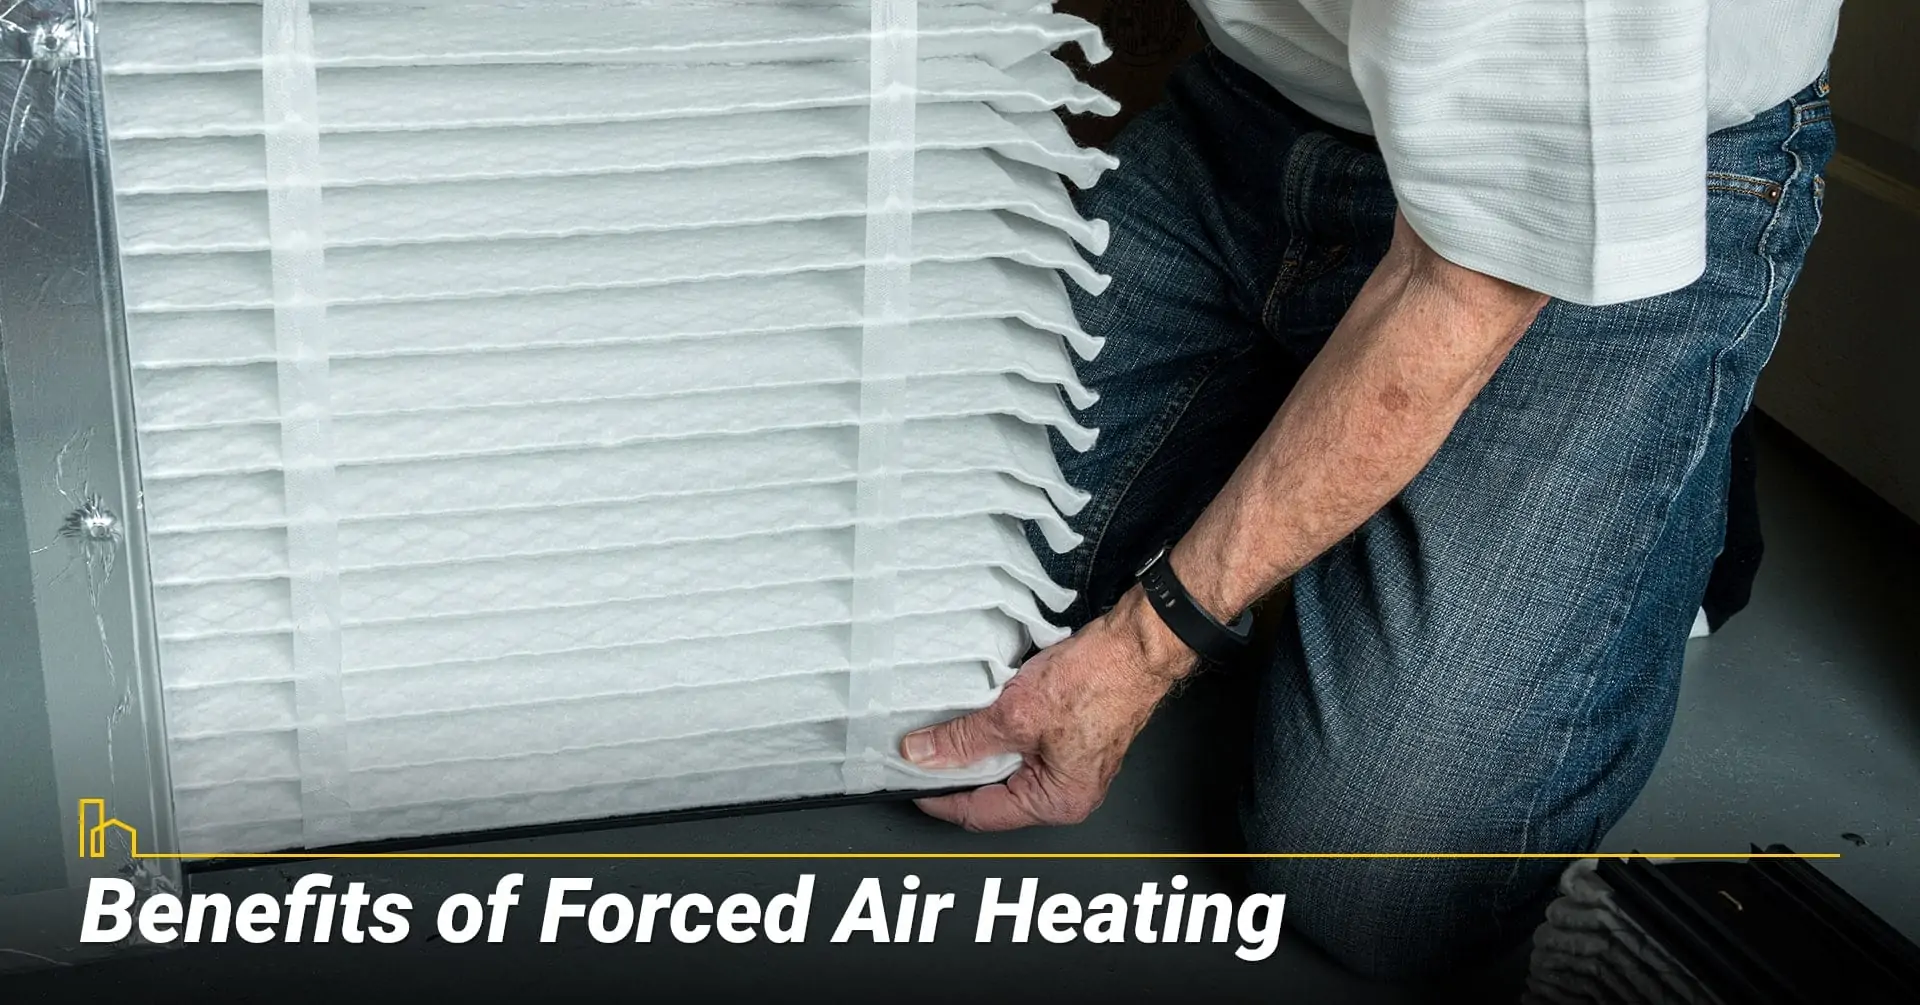 Benefits of Forced Air Heating, the upside of forced air system